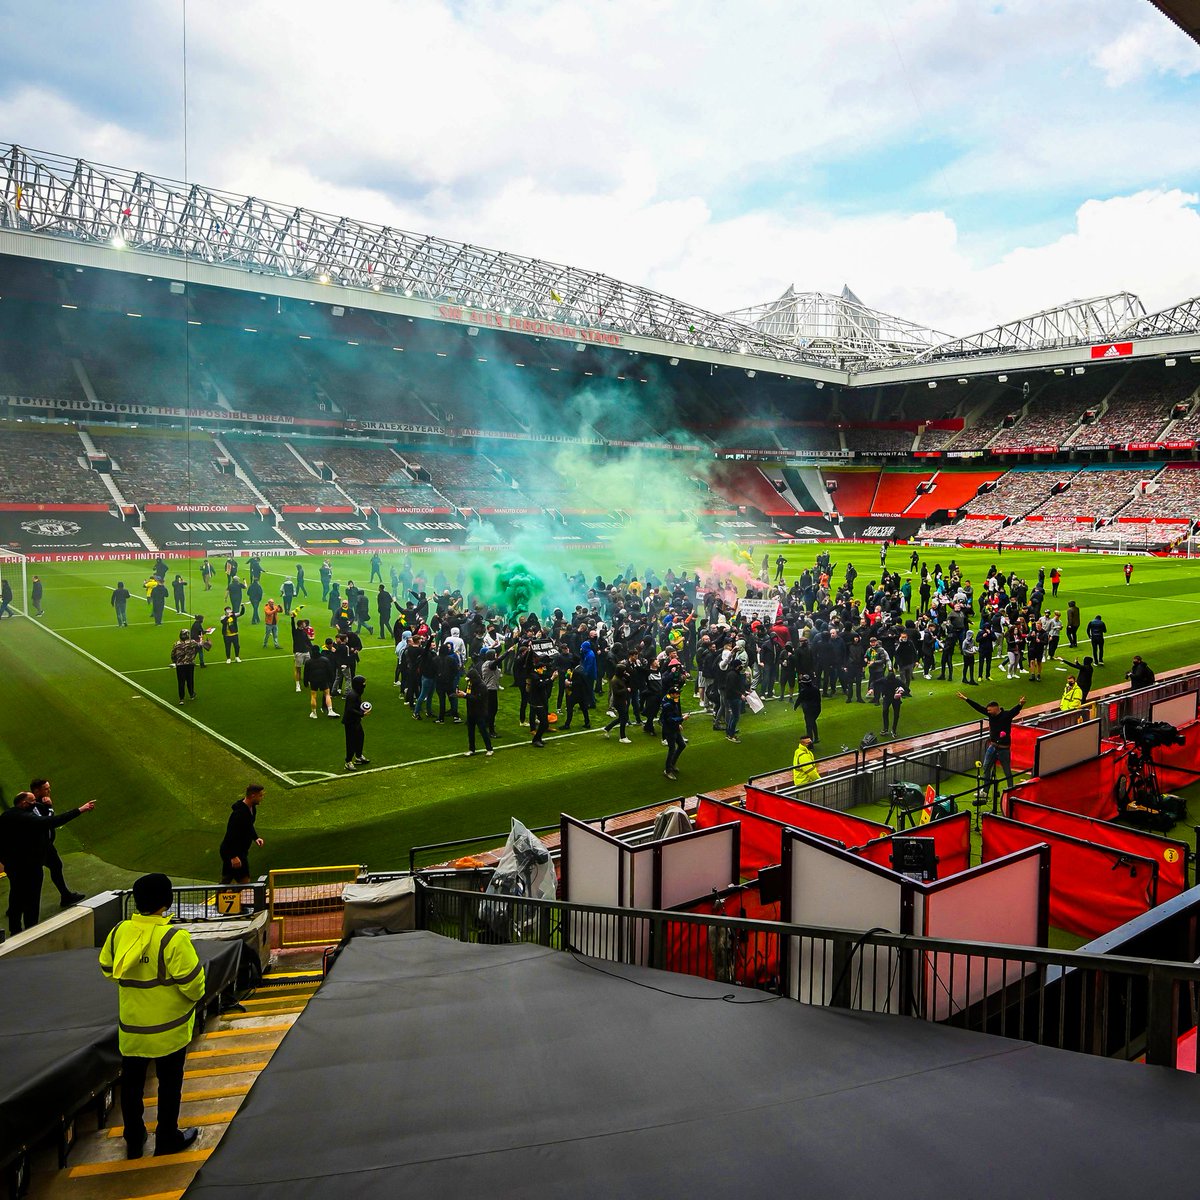 B R Football On Twitter Breaking Manchester United Vs Liverpool Has Been Postponed Amid Safety Concerns Following Fan Protests At Old Trafford Https T Co Snin2ctmyv